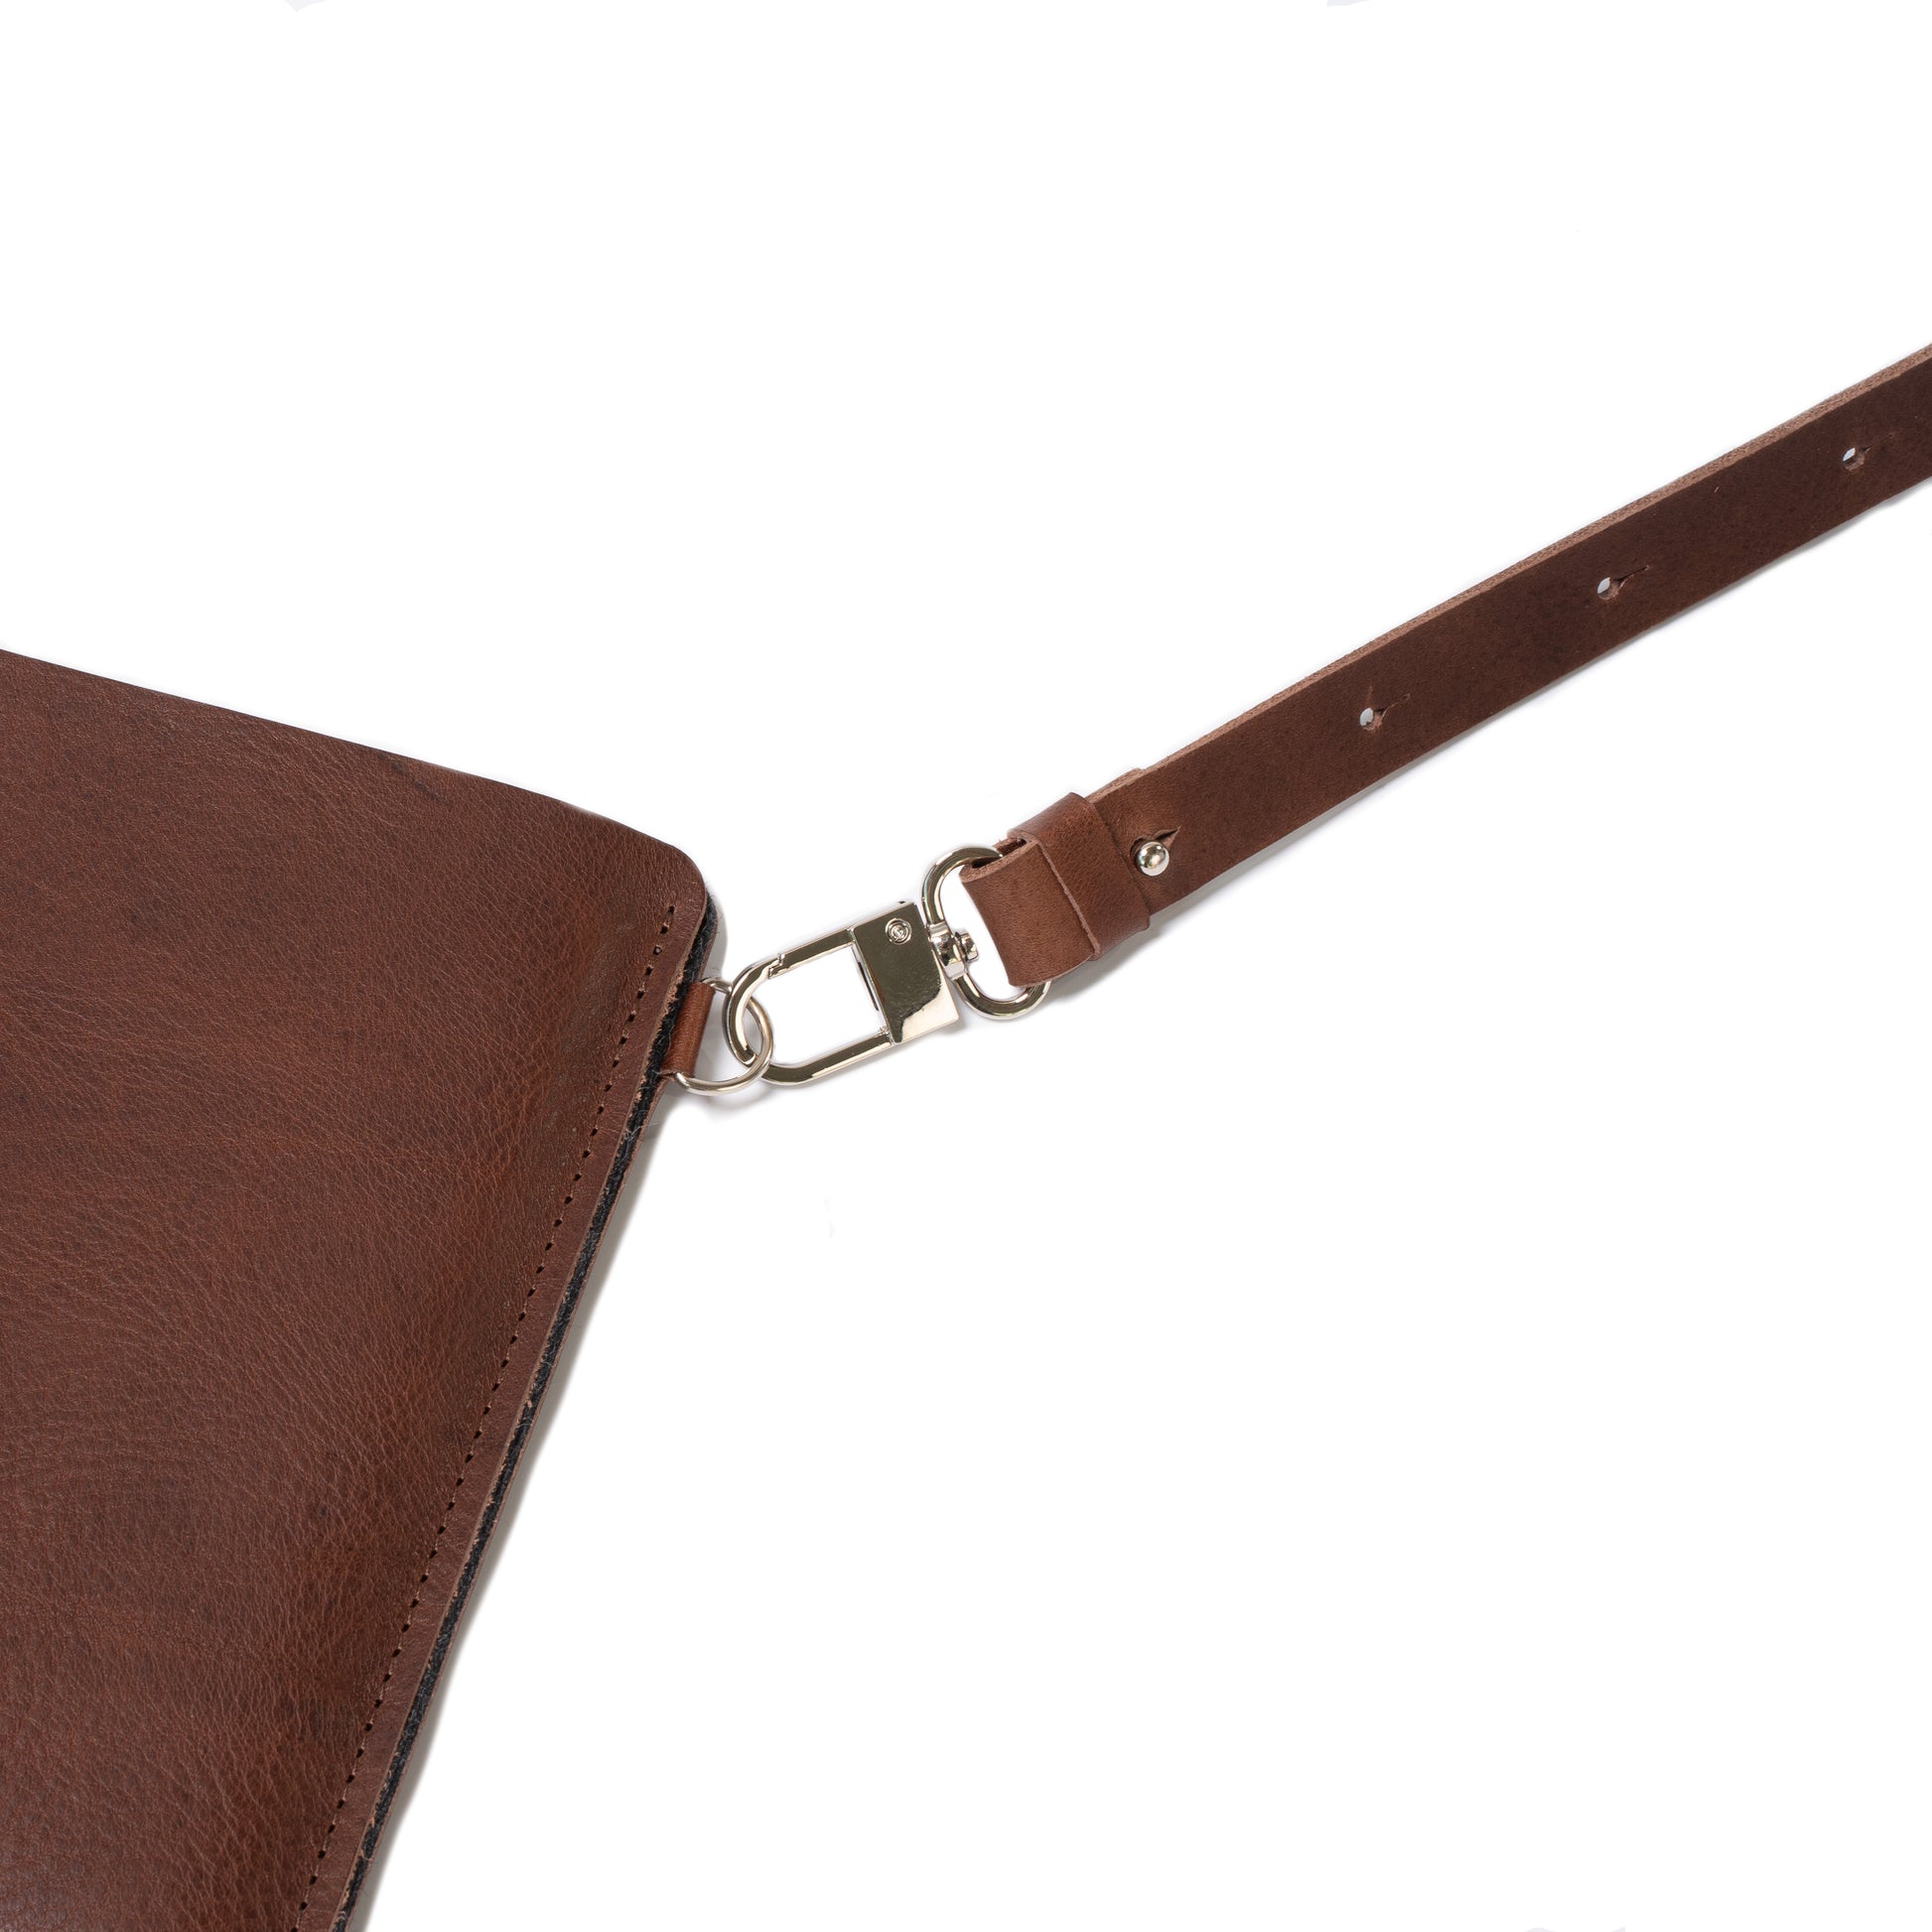 strap of leather sleeve for iPad 12.9 with adjustible strap in dark brown chocolate brown color the minimalist 3.0